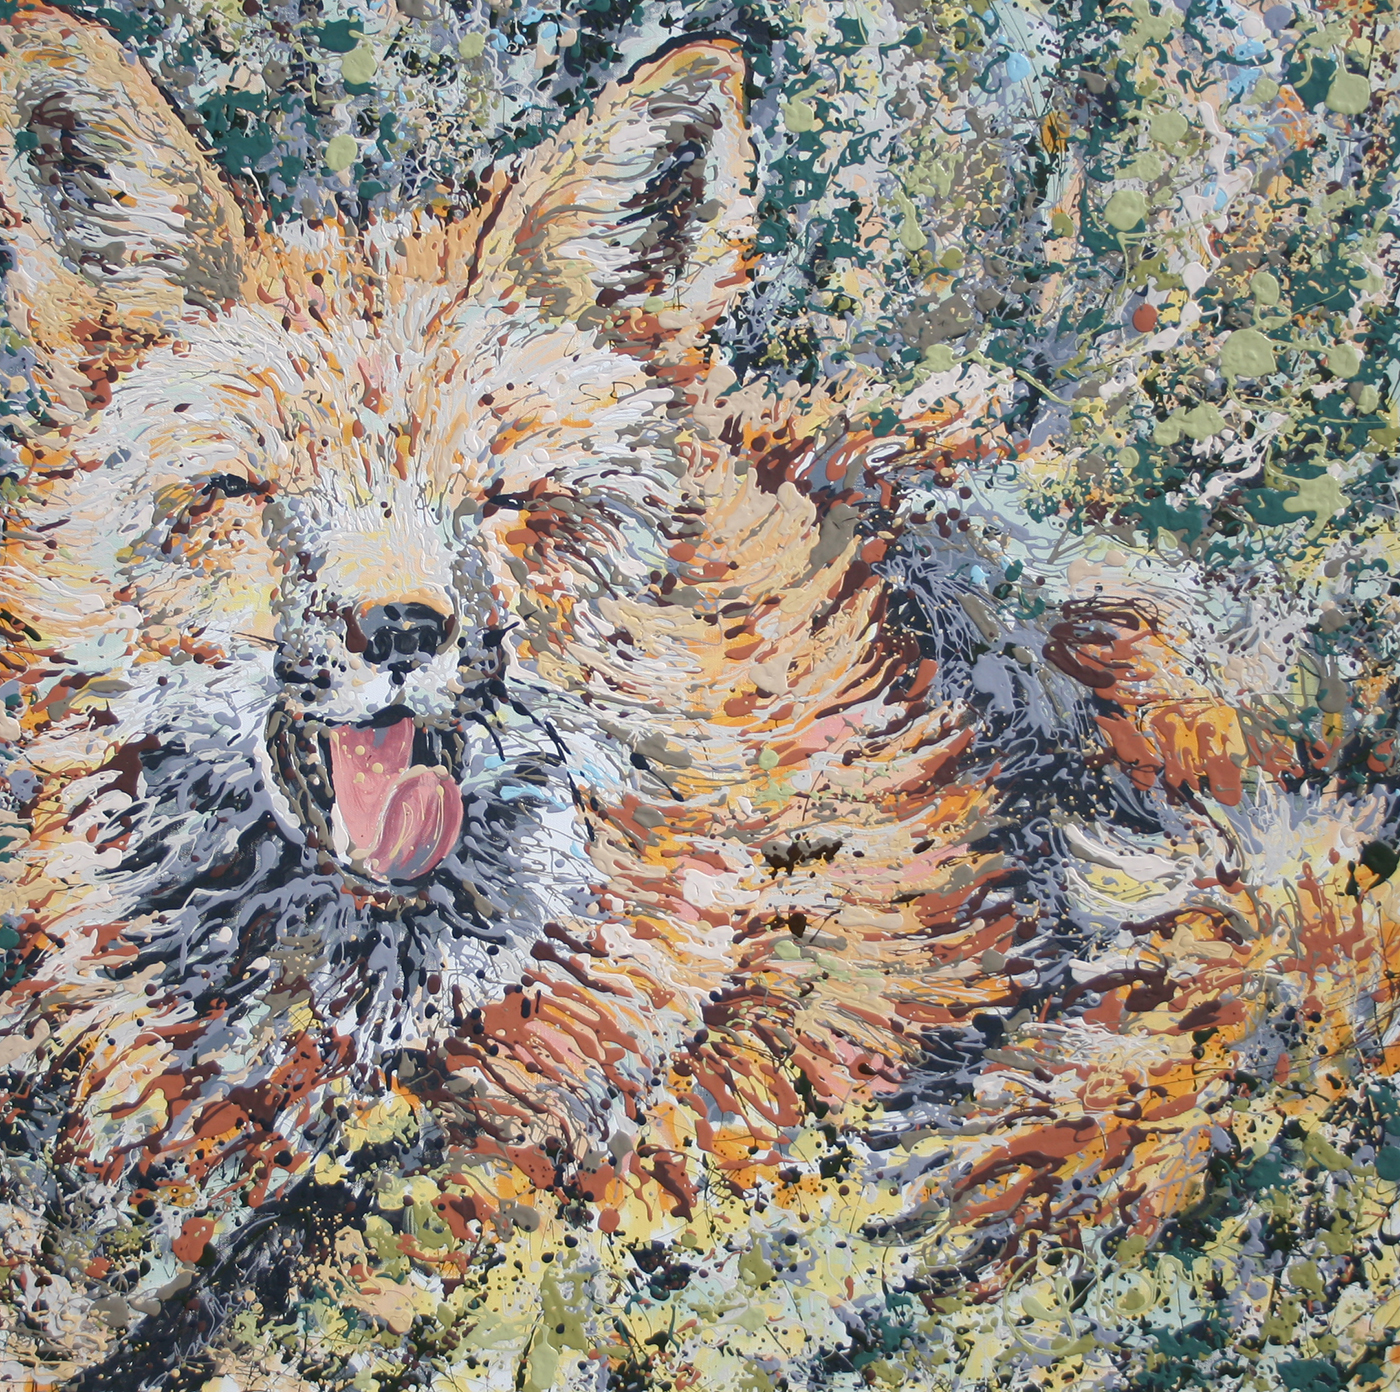 Neighborhood Fox Latex Enamel Painting on Gallery Wrapped Canvas by Fort Collins, Colorado Artist Lisa Cameron Russell